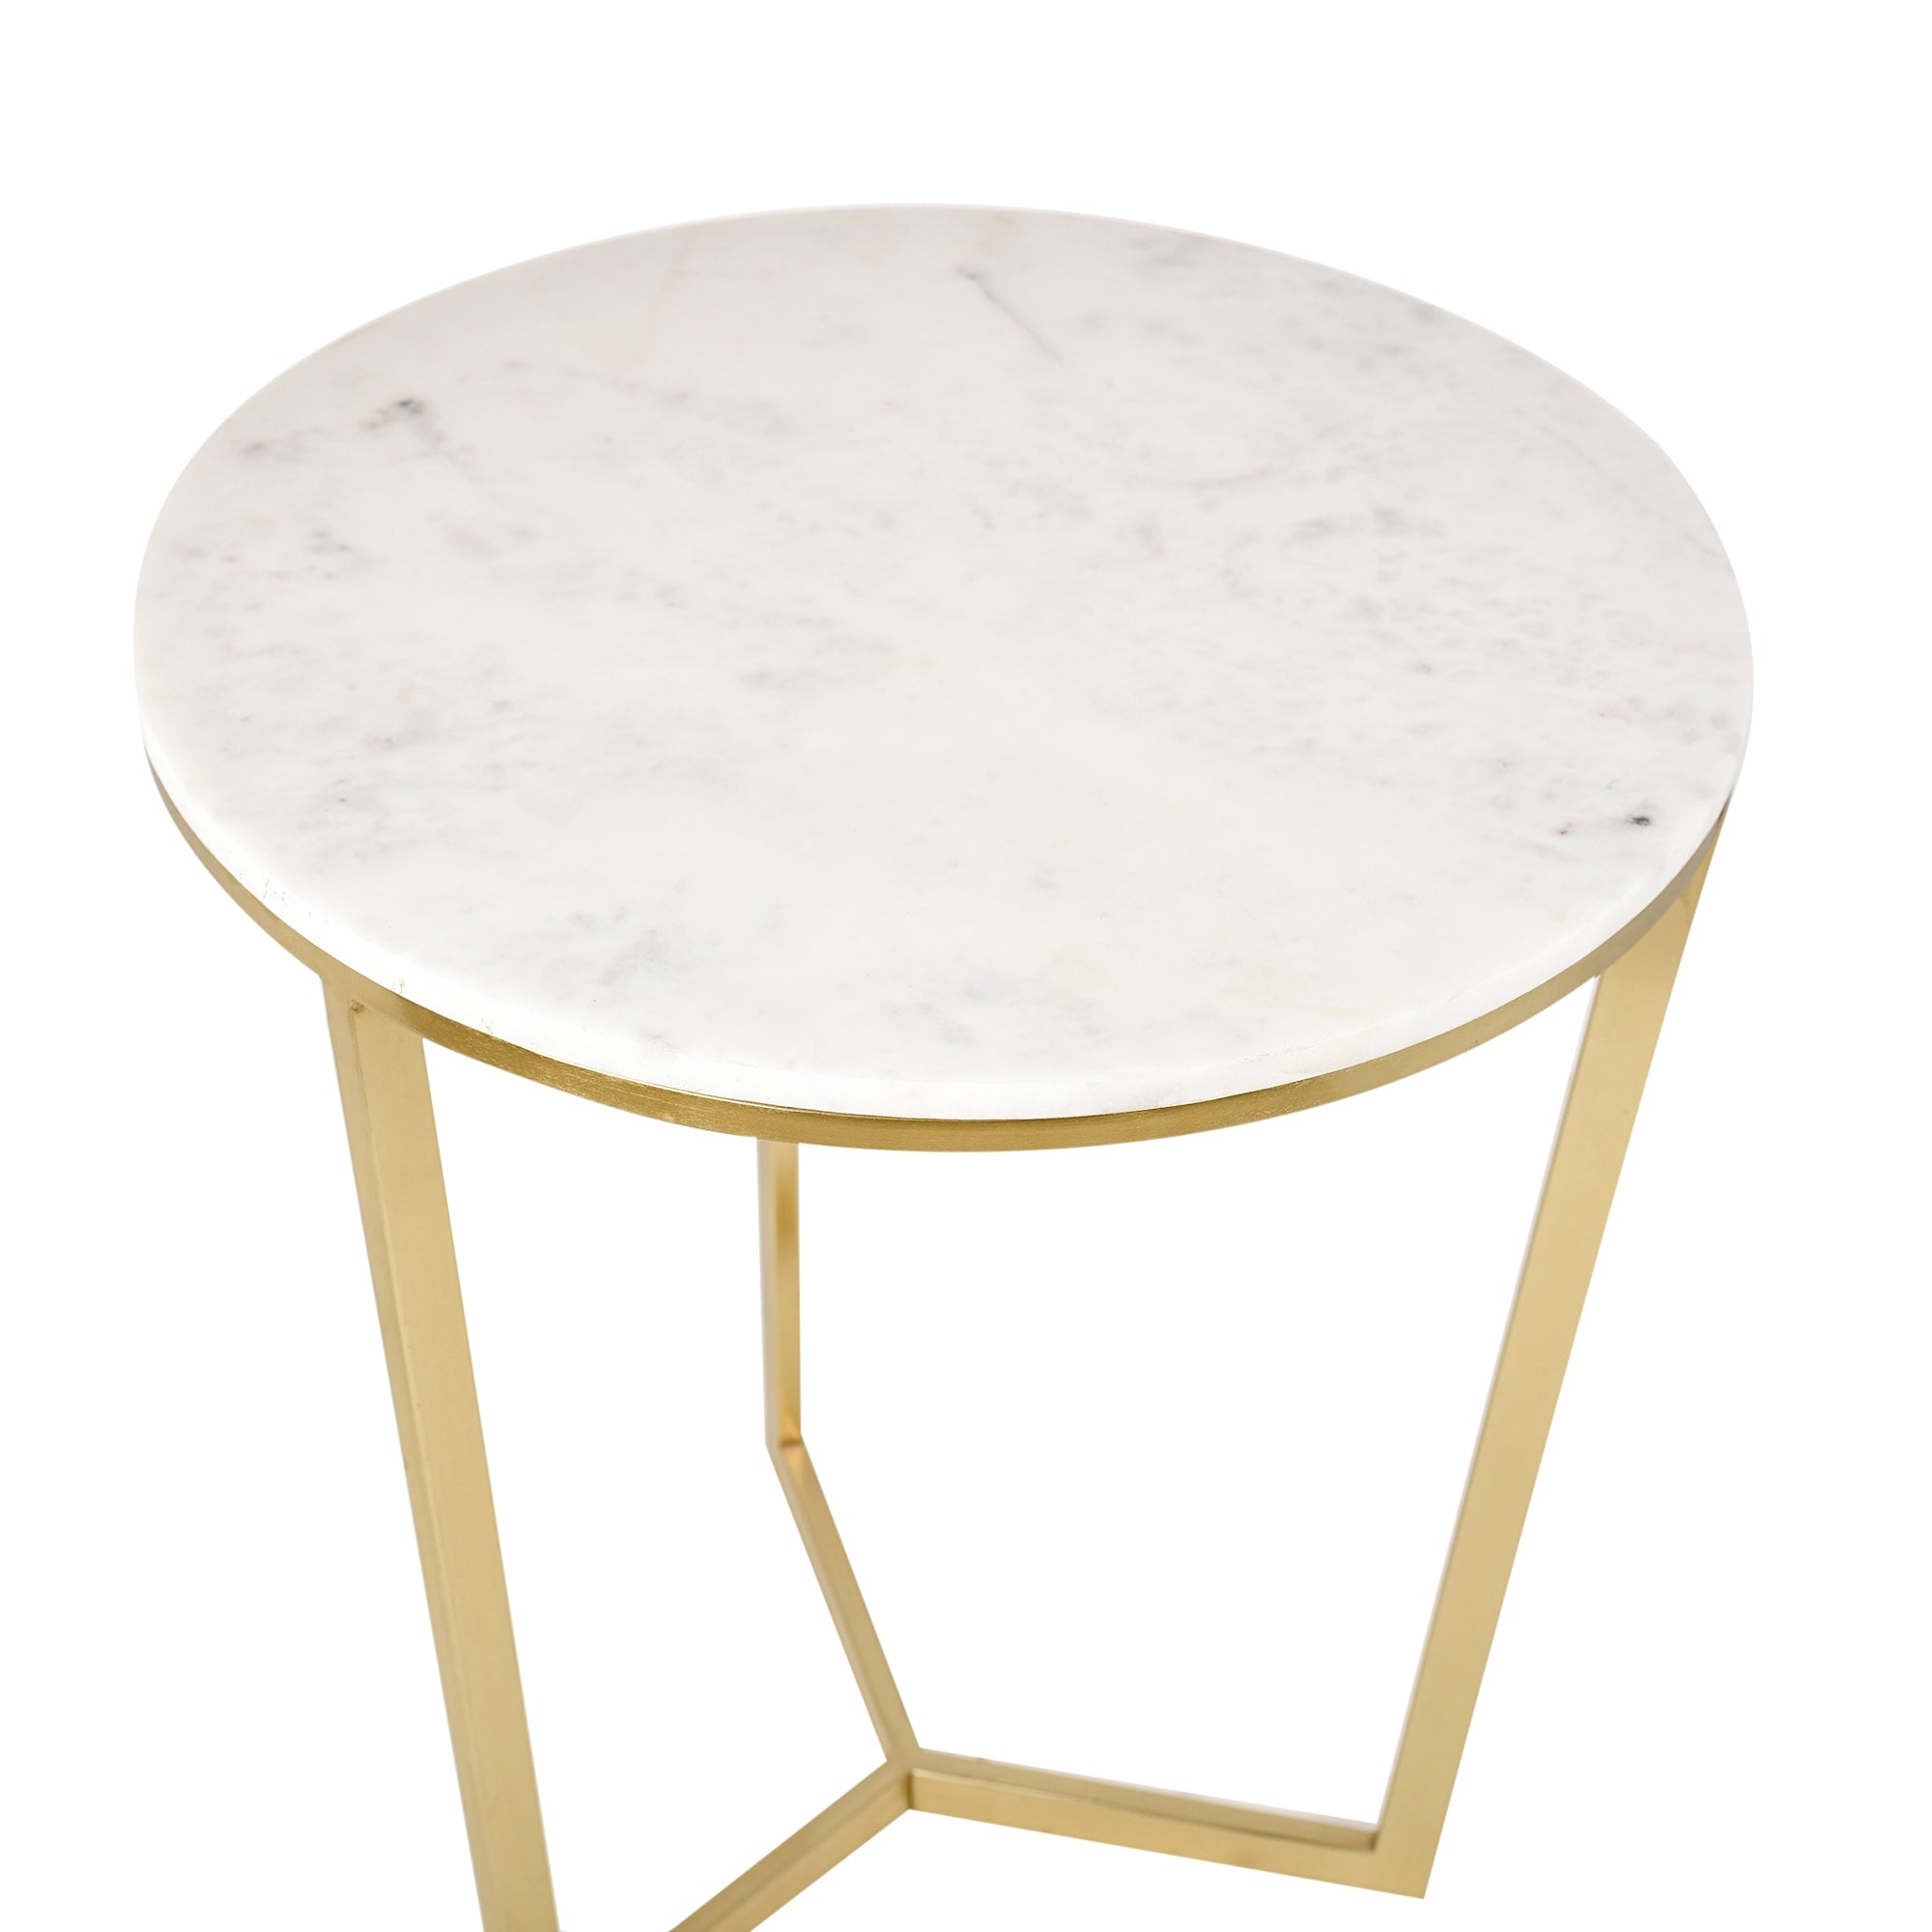 Round Coffee Table Gold and White Finish 21 inches Tall